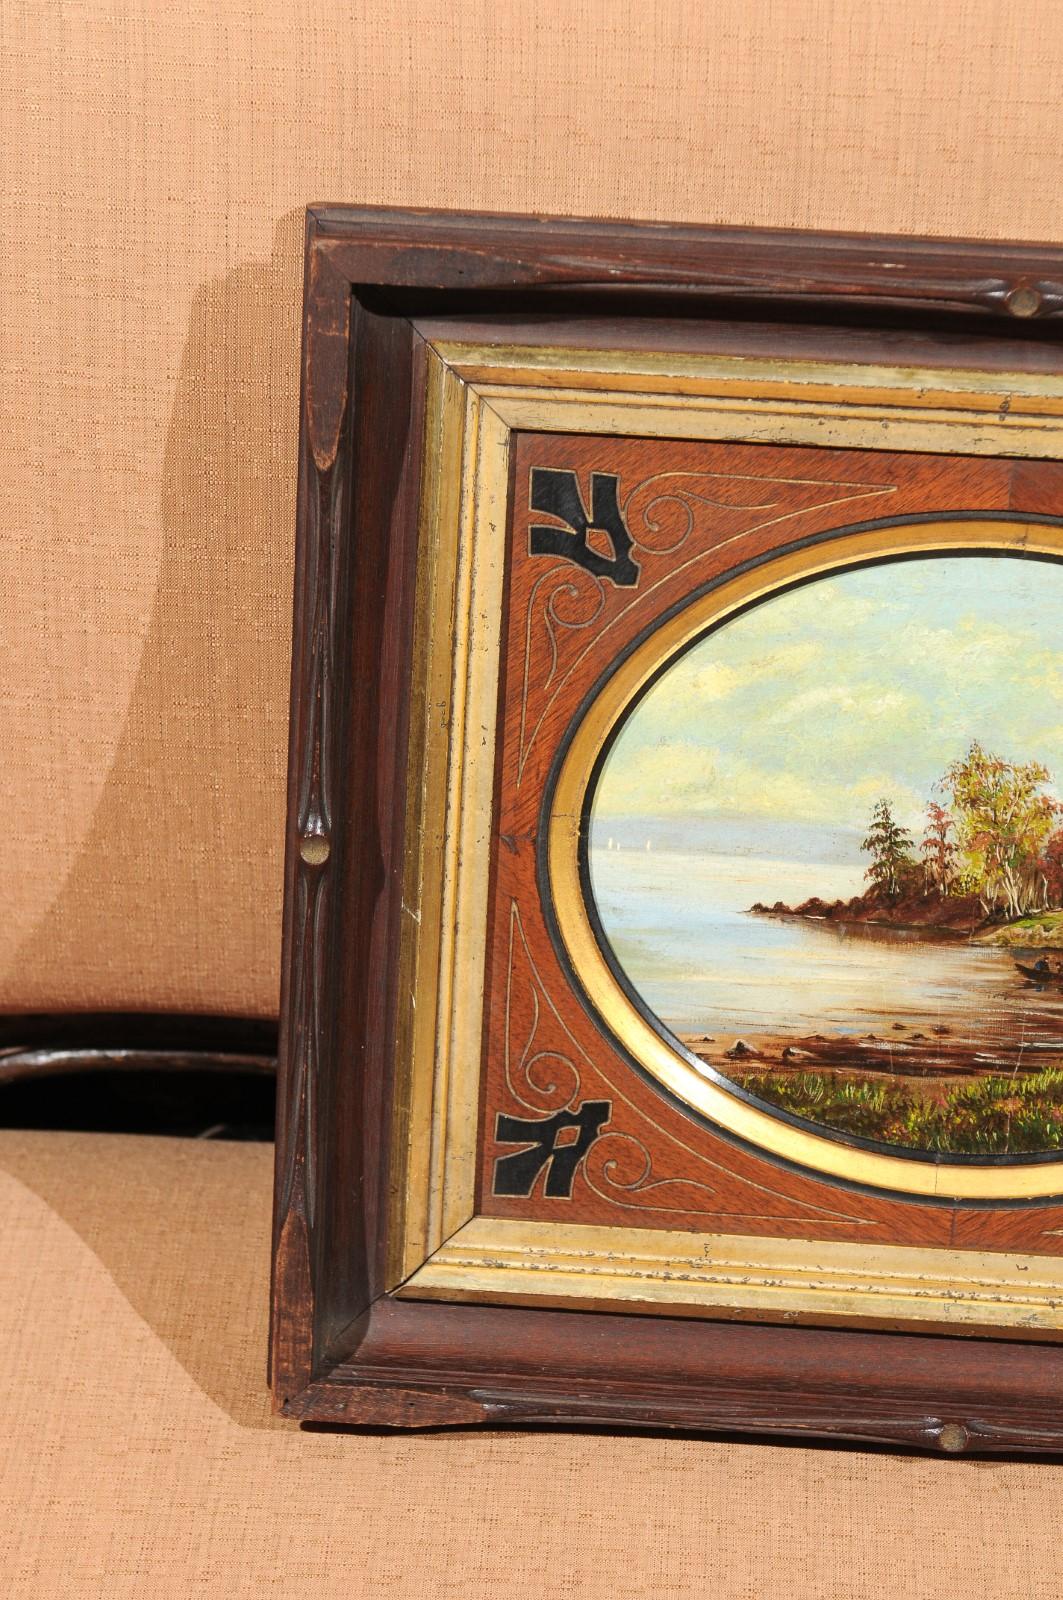 Hand-Painted 19th Century Oval Oil on Canvas Painting of Hudson River & Washington's Tomb